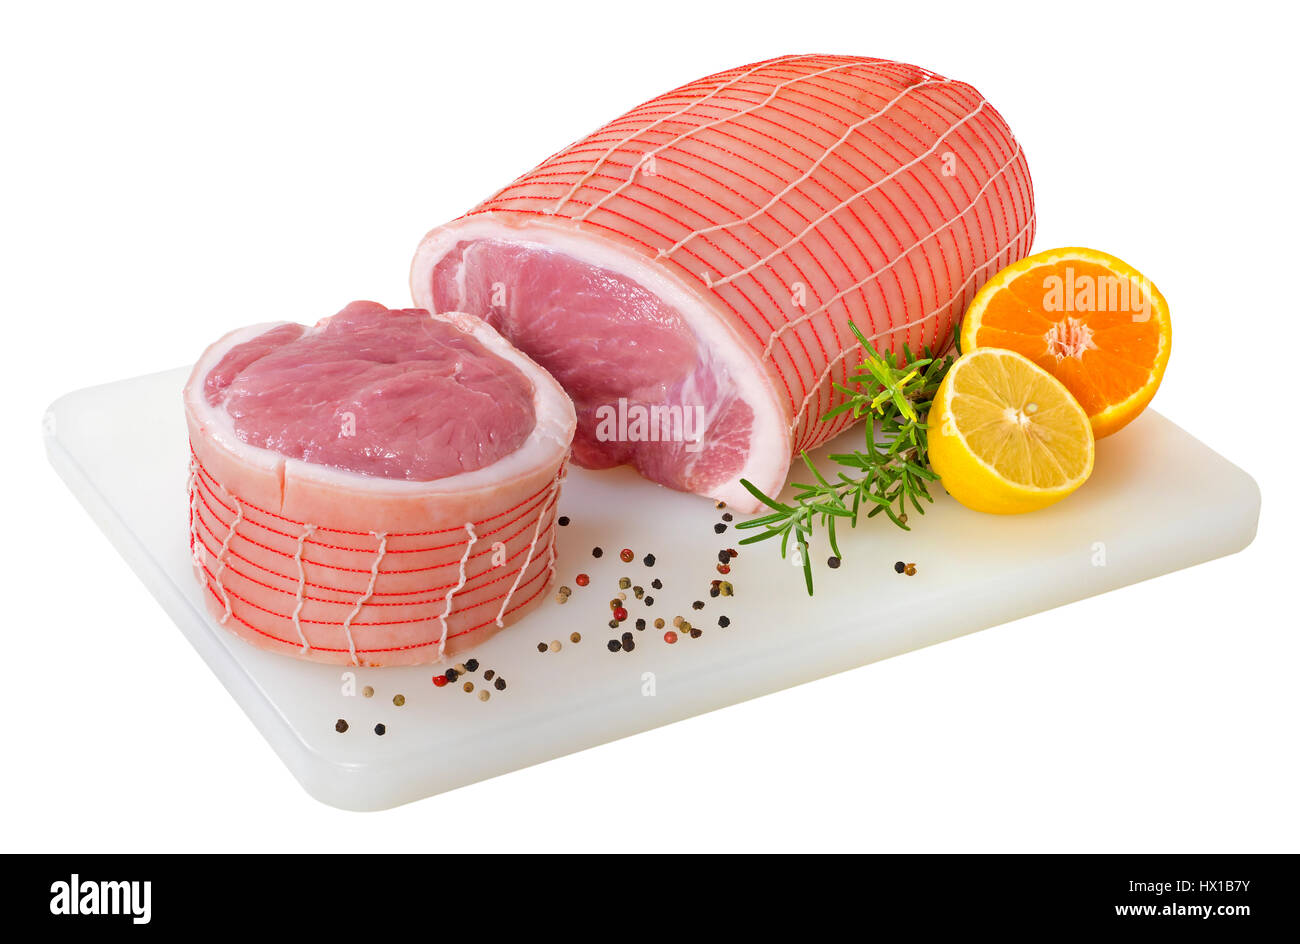 Pork meat with skin Stock Photo